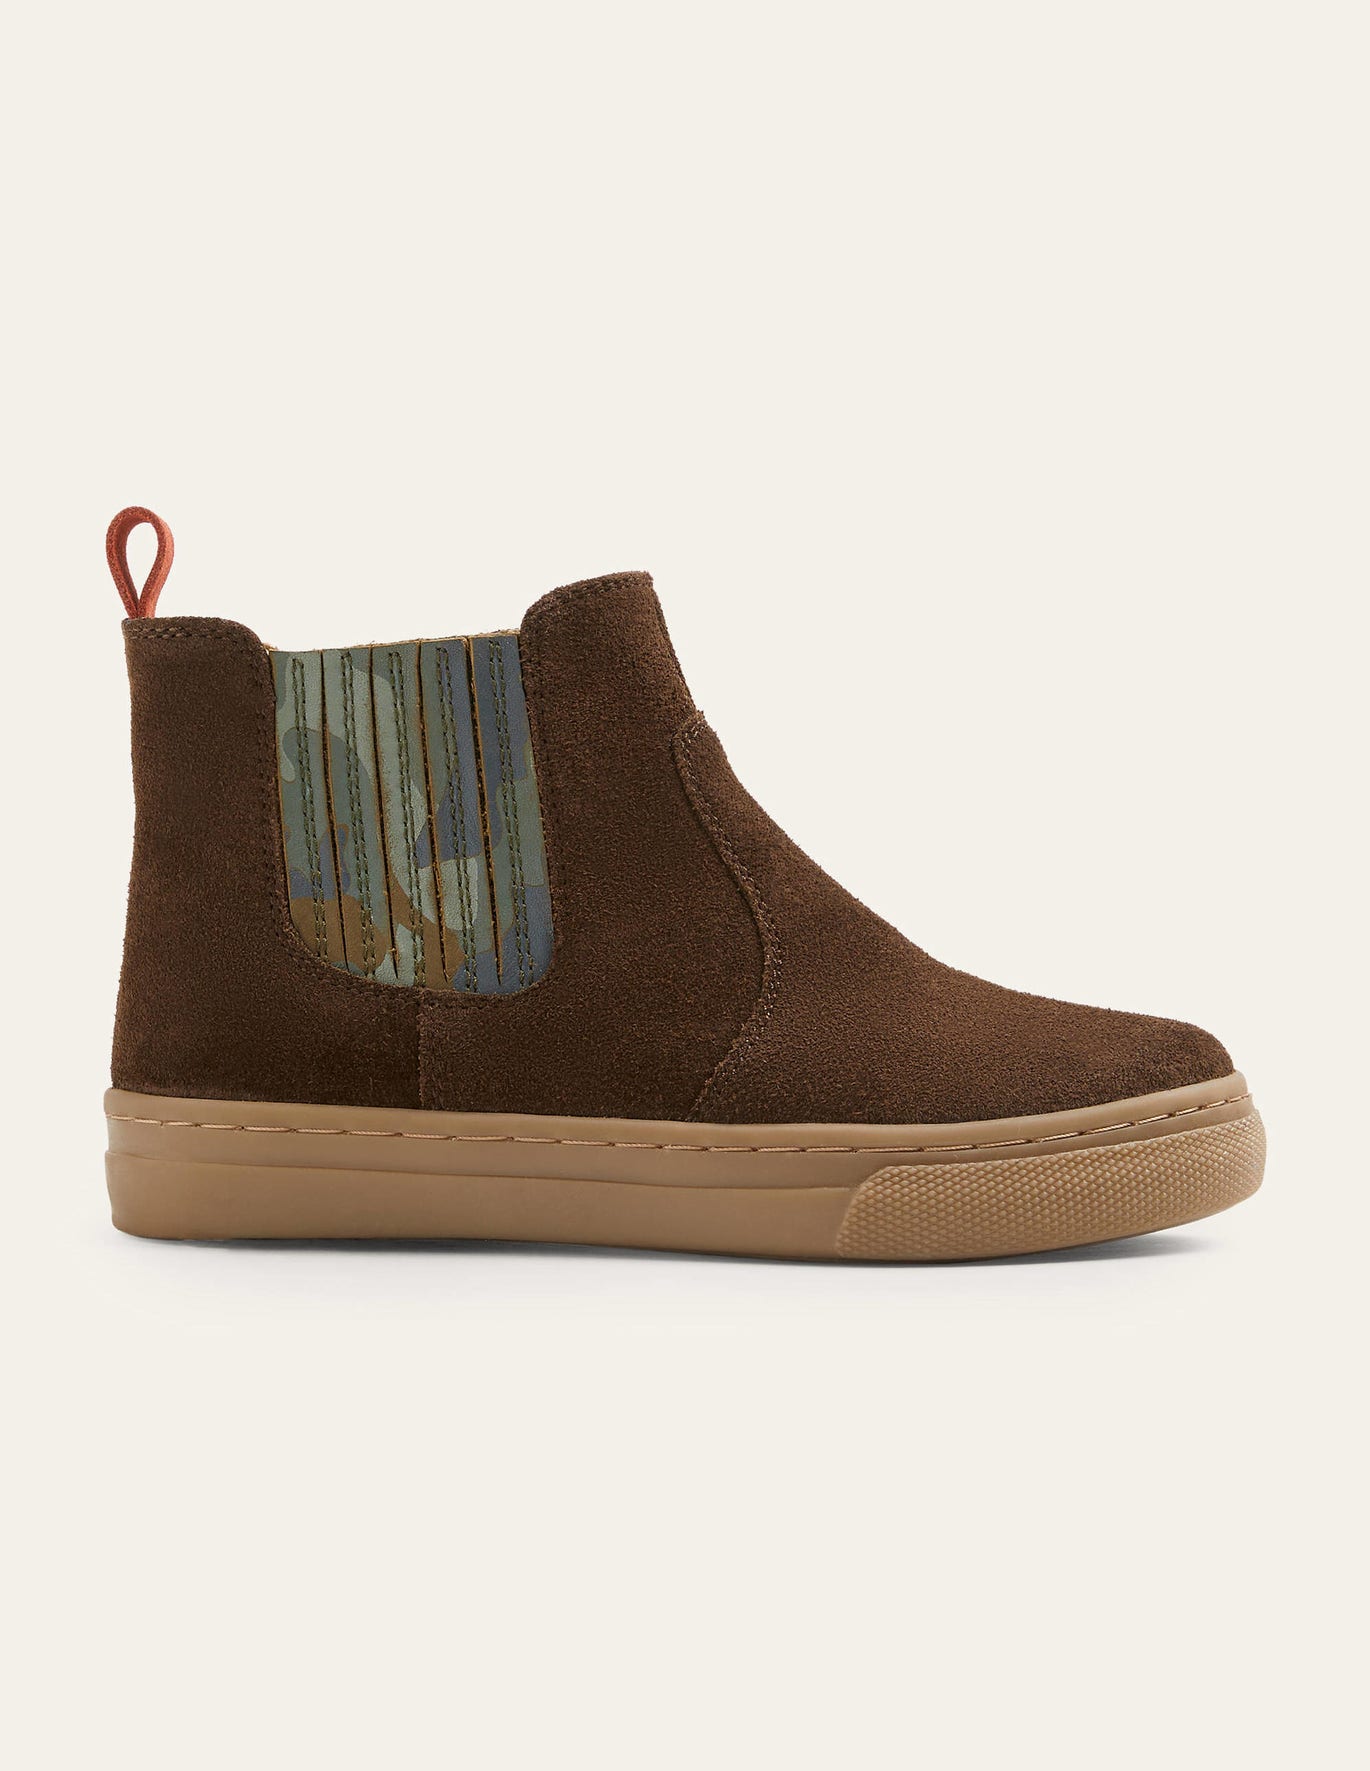 Boden Suede Boots - Brown